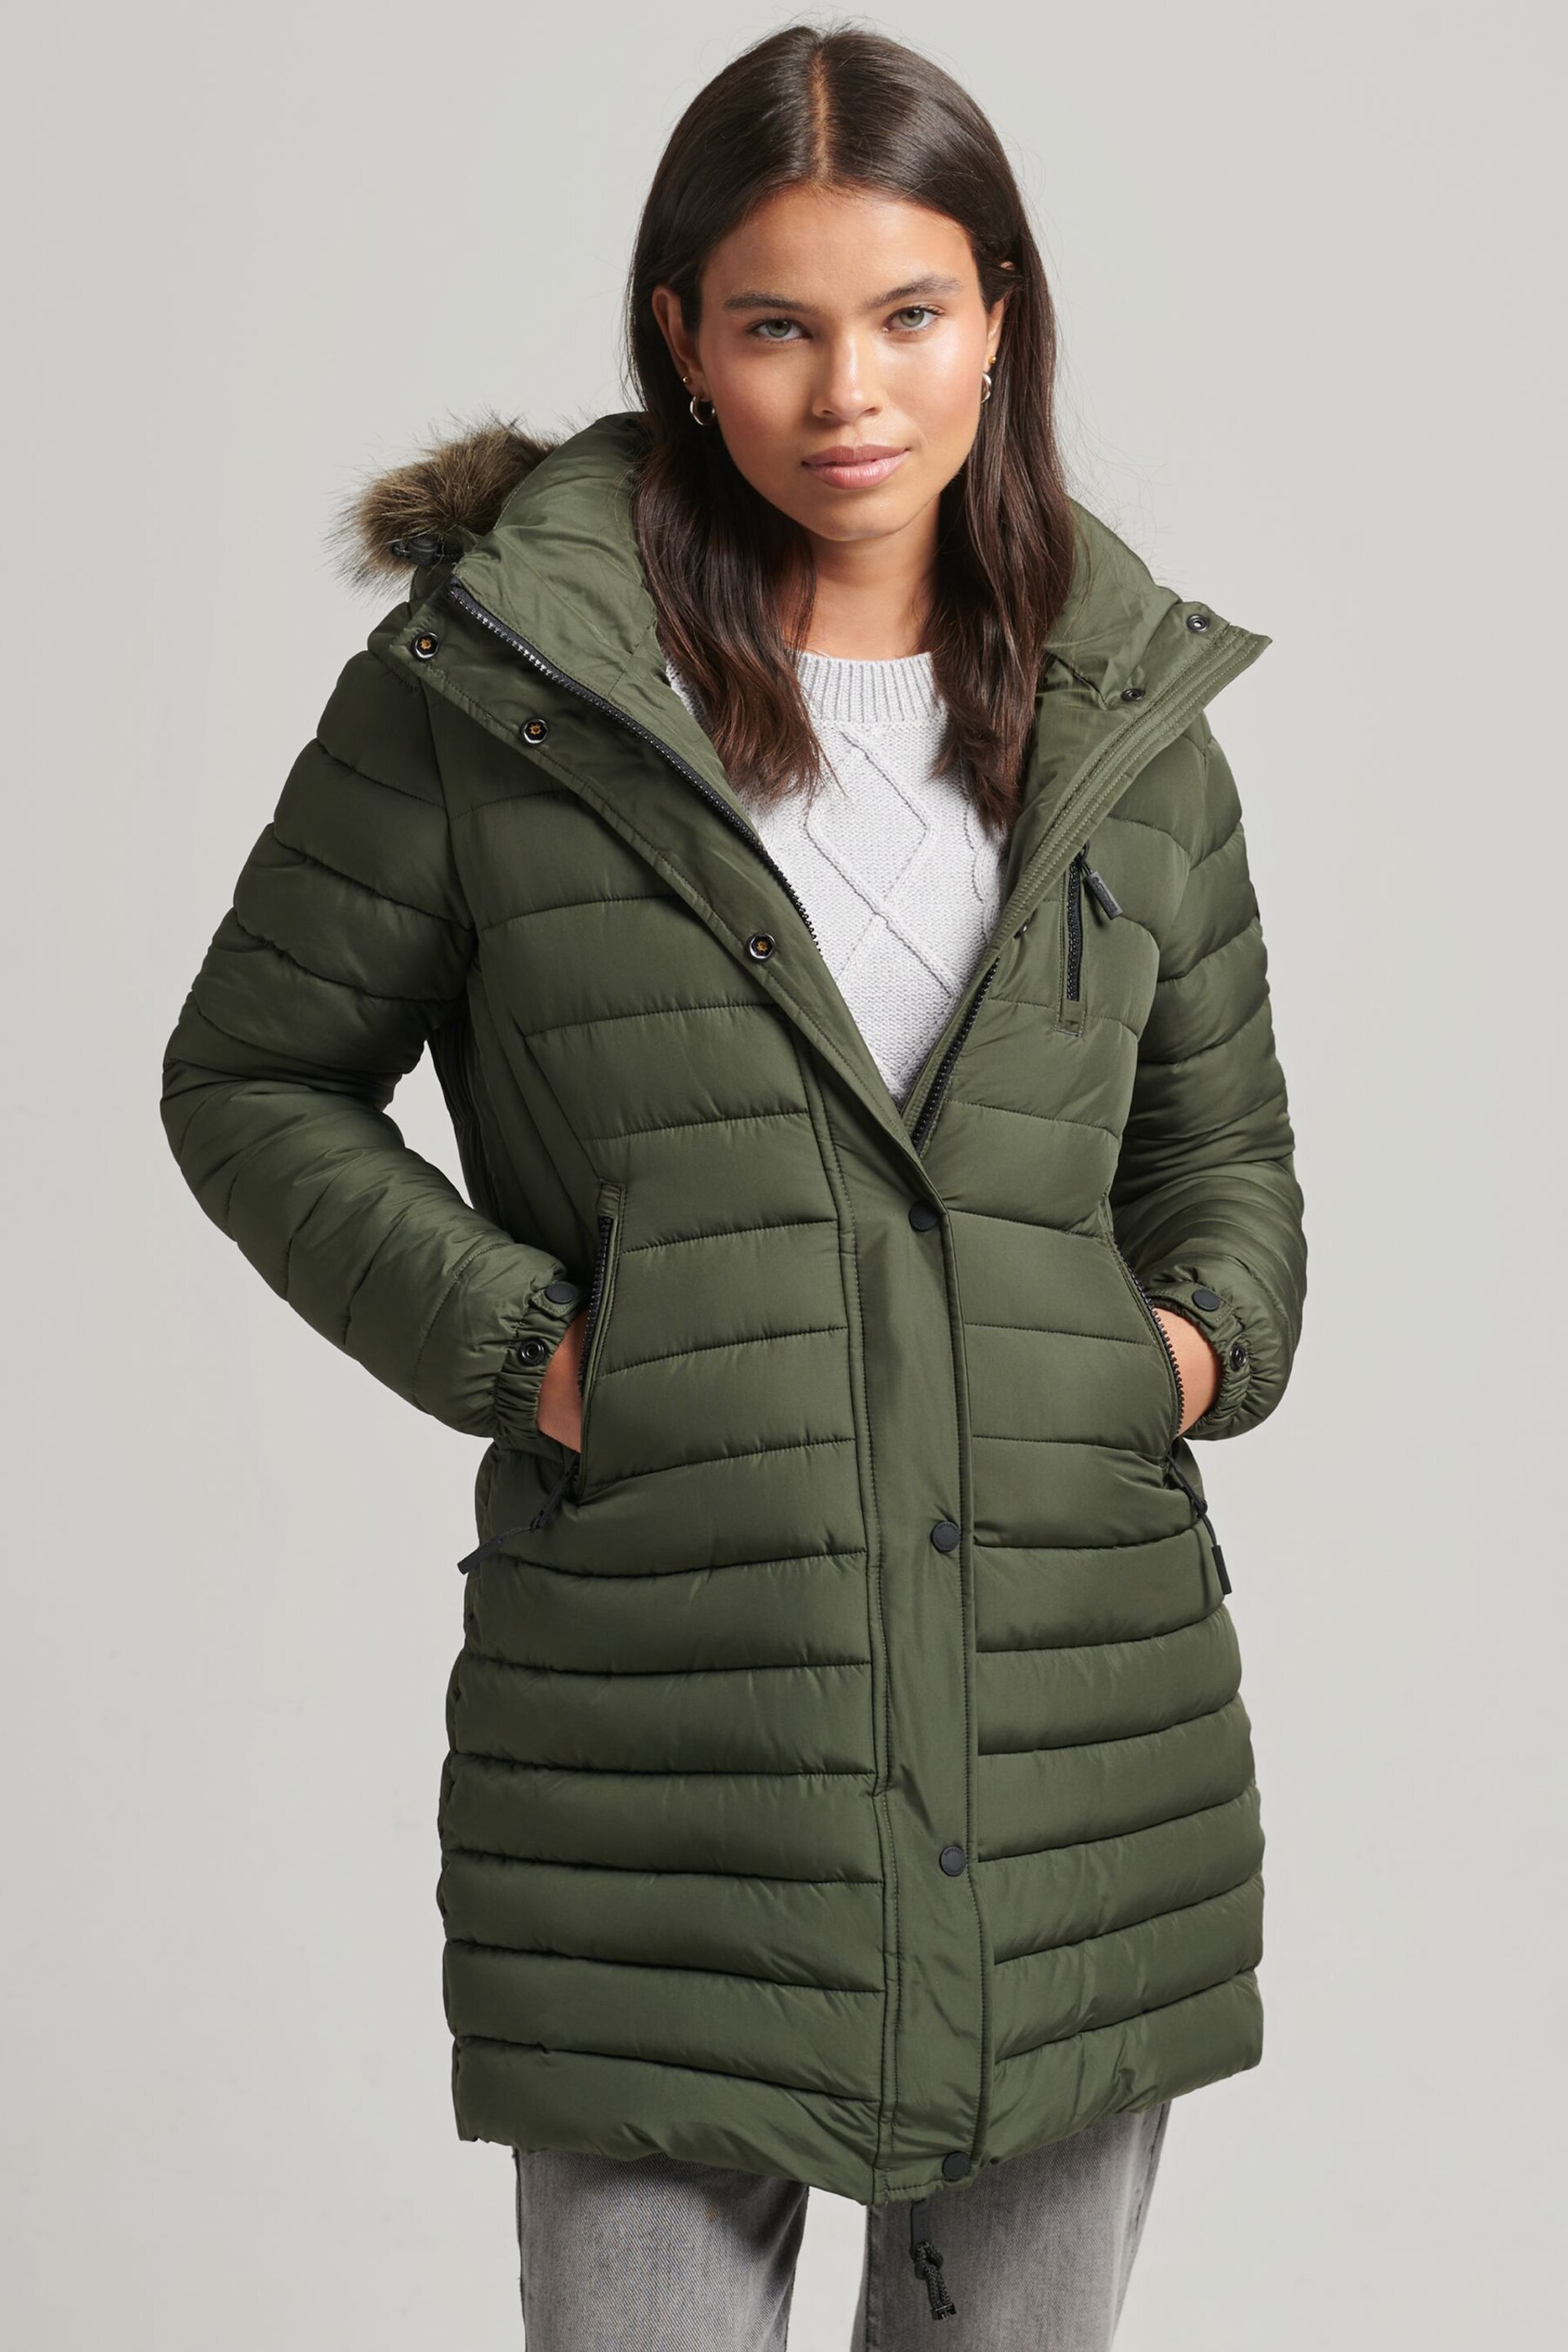 Superdry Green Faux Fur Hooded Mid Length Puffer Jacket - Image 2 of 7